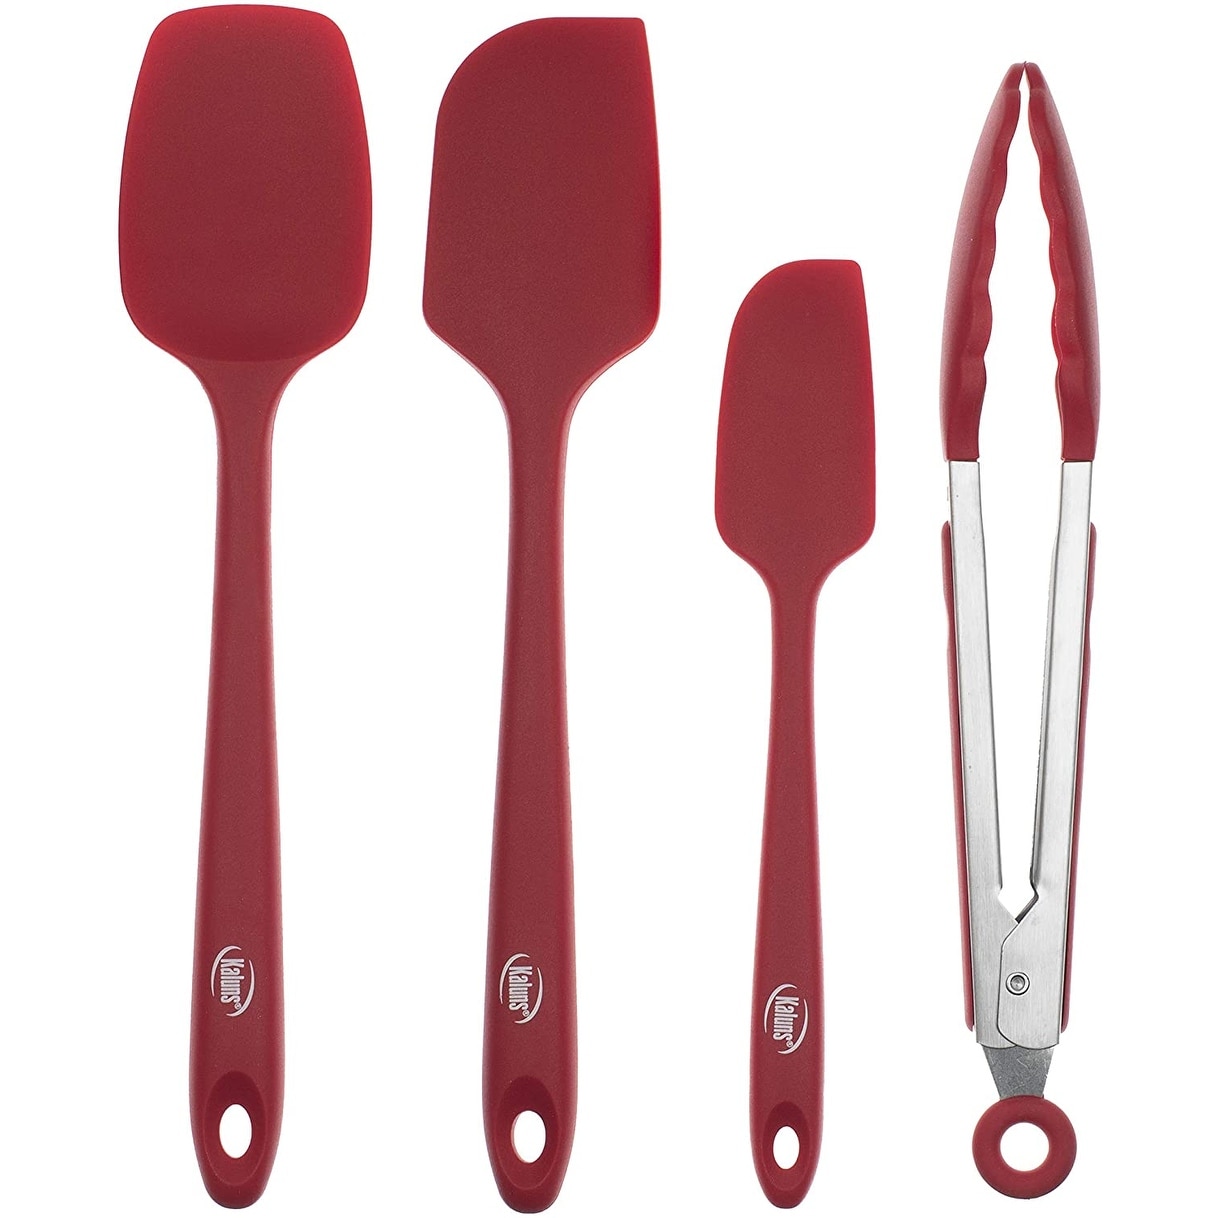 https://ak1.ostkcdn.com/images/products/is/images/direct/6dd31fb64cff90e0962ce066a978f6362531ff88/Kaluns-Silicone-Spatula-Set%2C-3-Rubber-Spatulas-and-One-Kitchen-Tongs%2C-Heat-Resistant%2C-Stainless-Steel-Core%2C-Kitchen-Tools.jpg